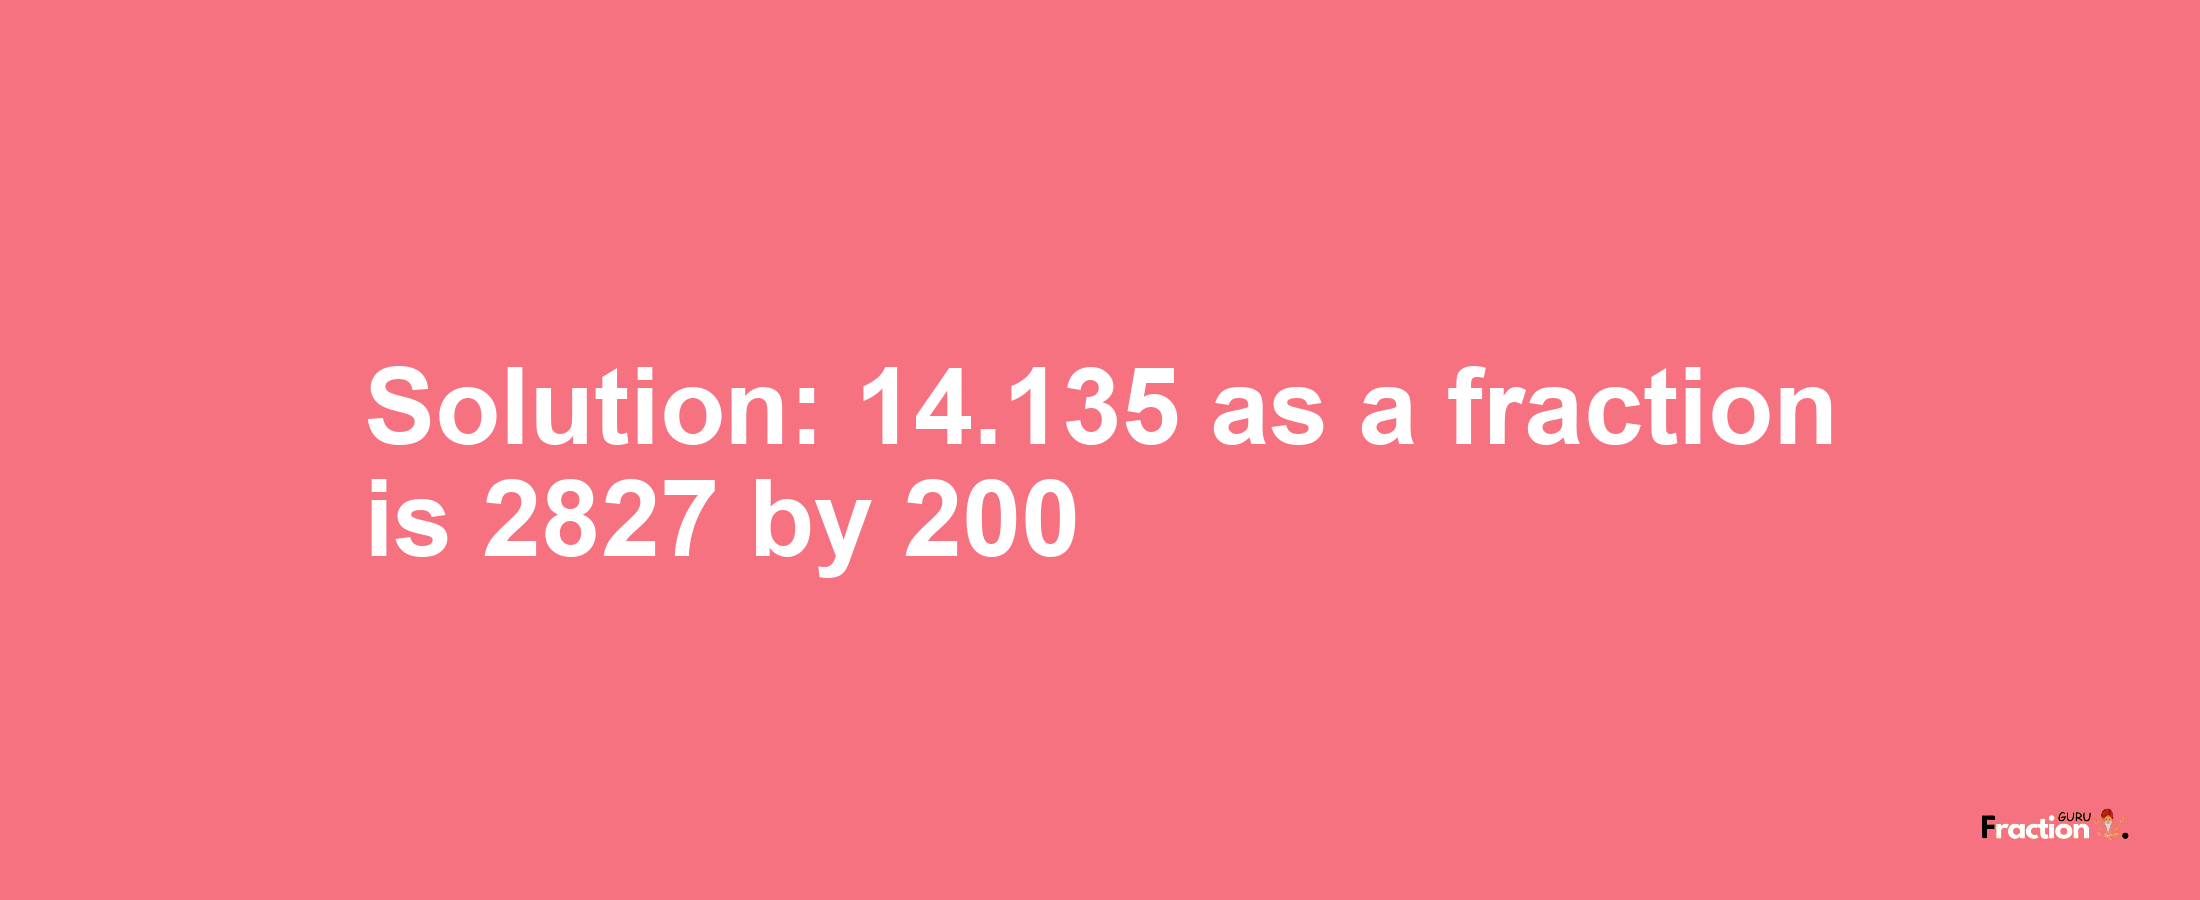 Solution:14.135 as a fraction is 2827/200